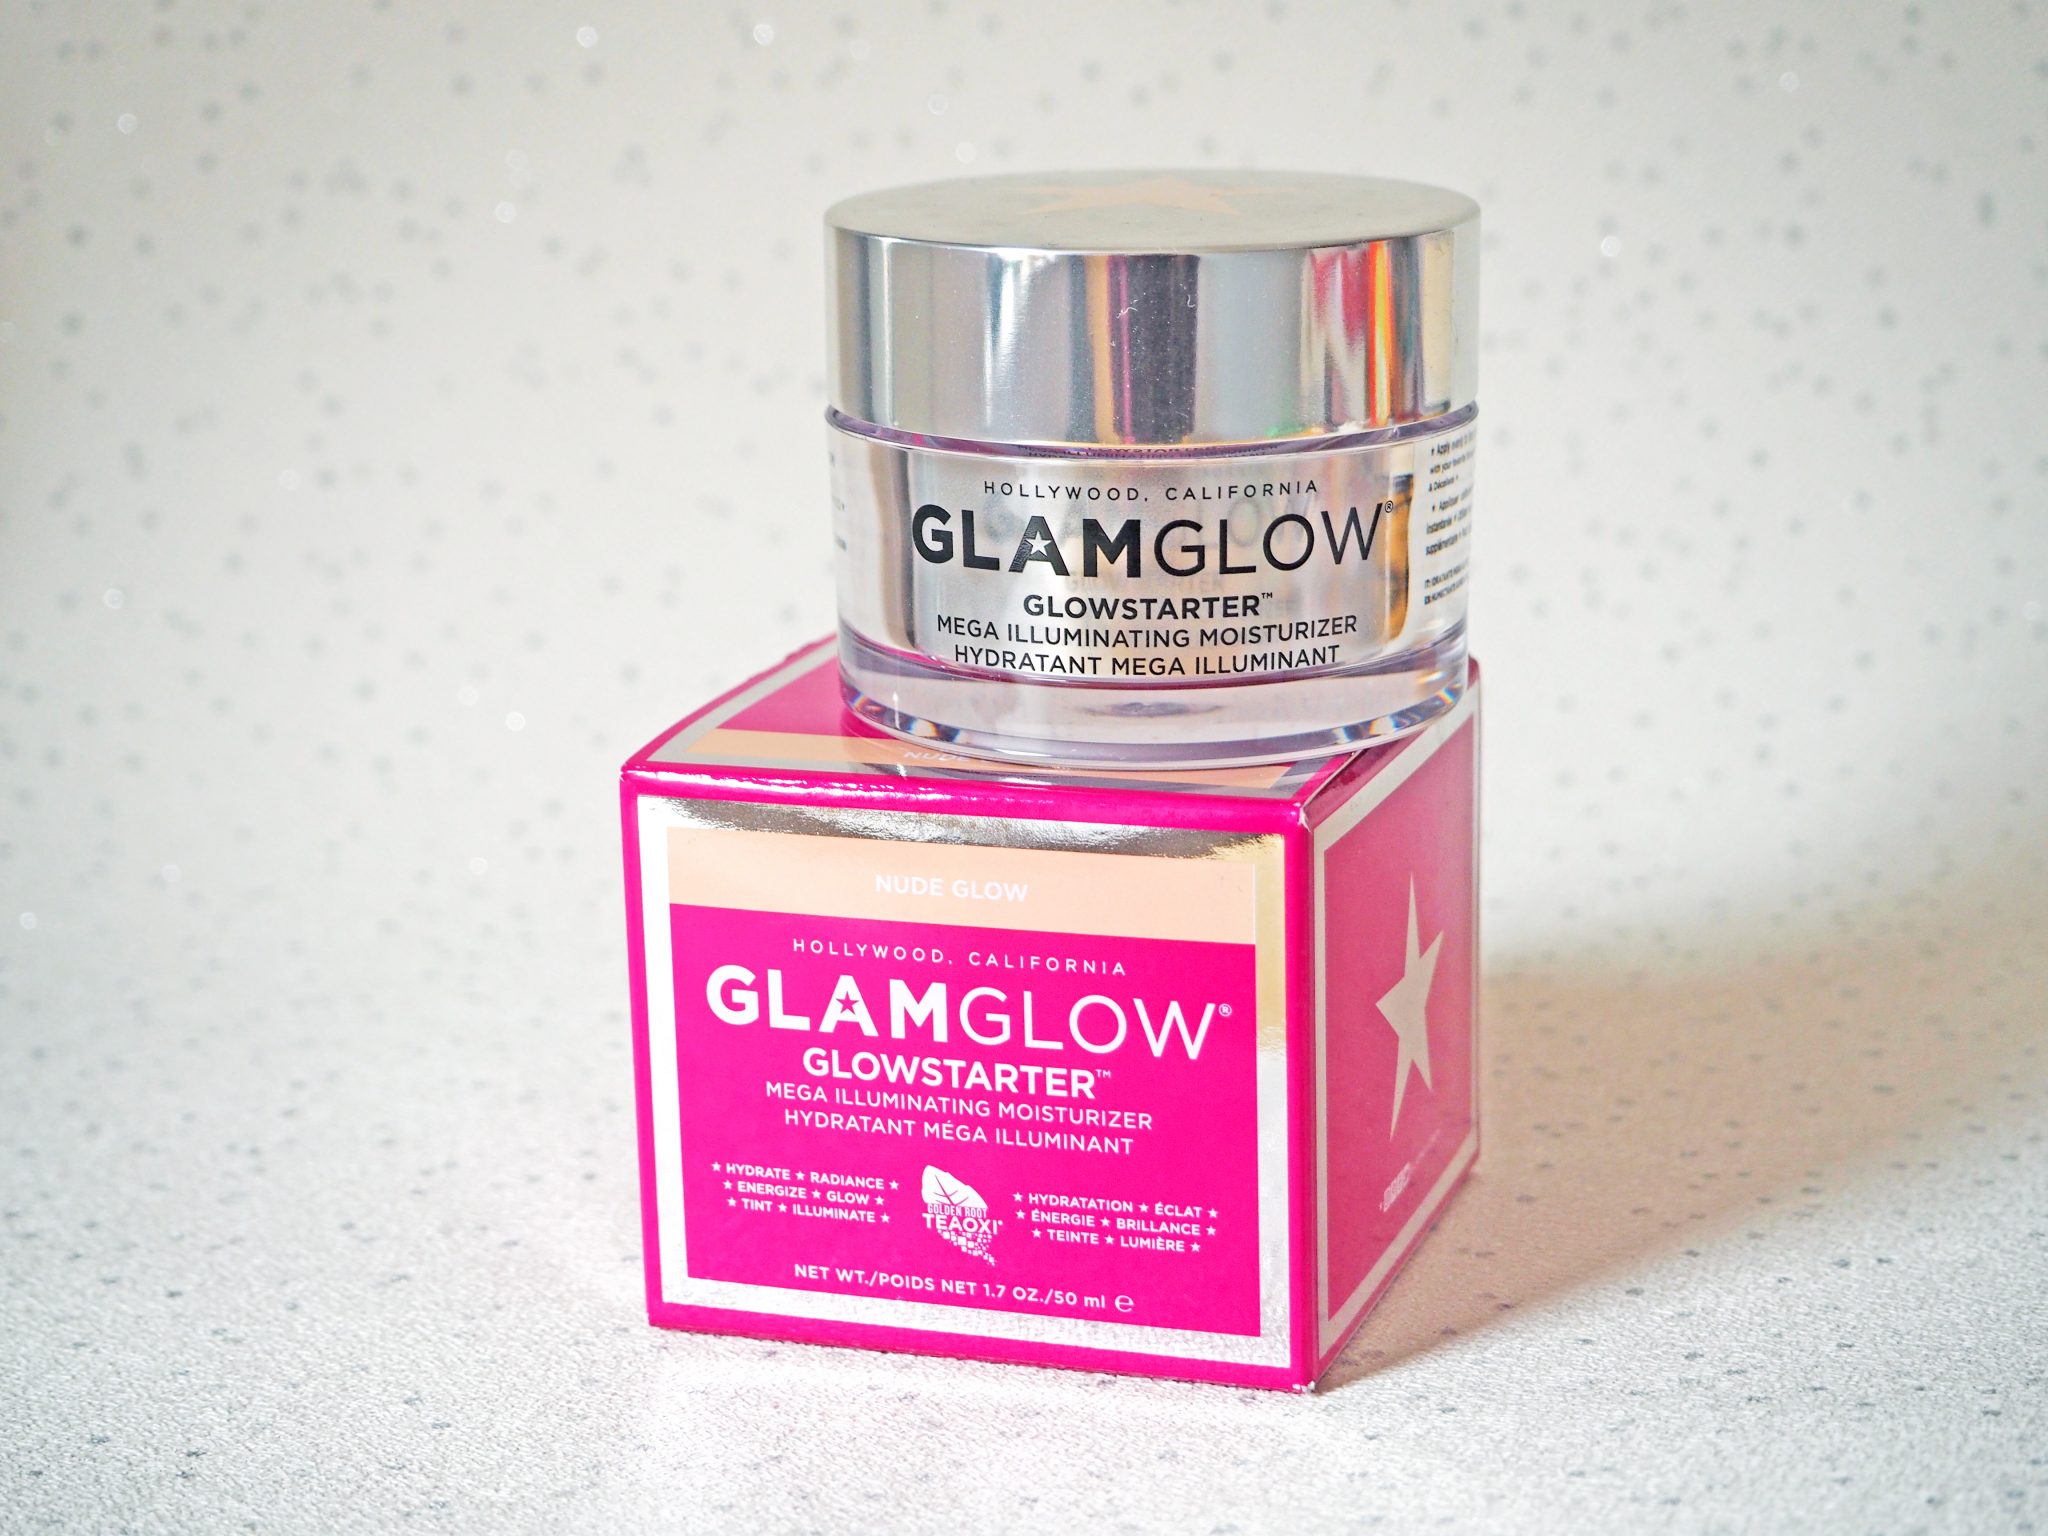 Laura Kate Lucas - Manchester Fashion, Food and Beauty Blogger | Glam Glow Glowstarter Product Review